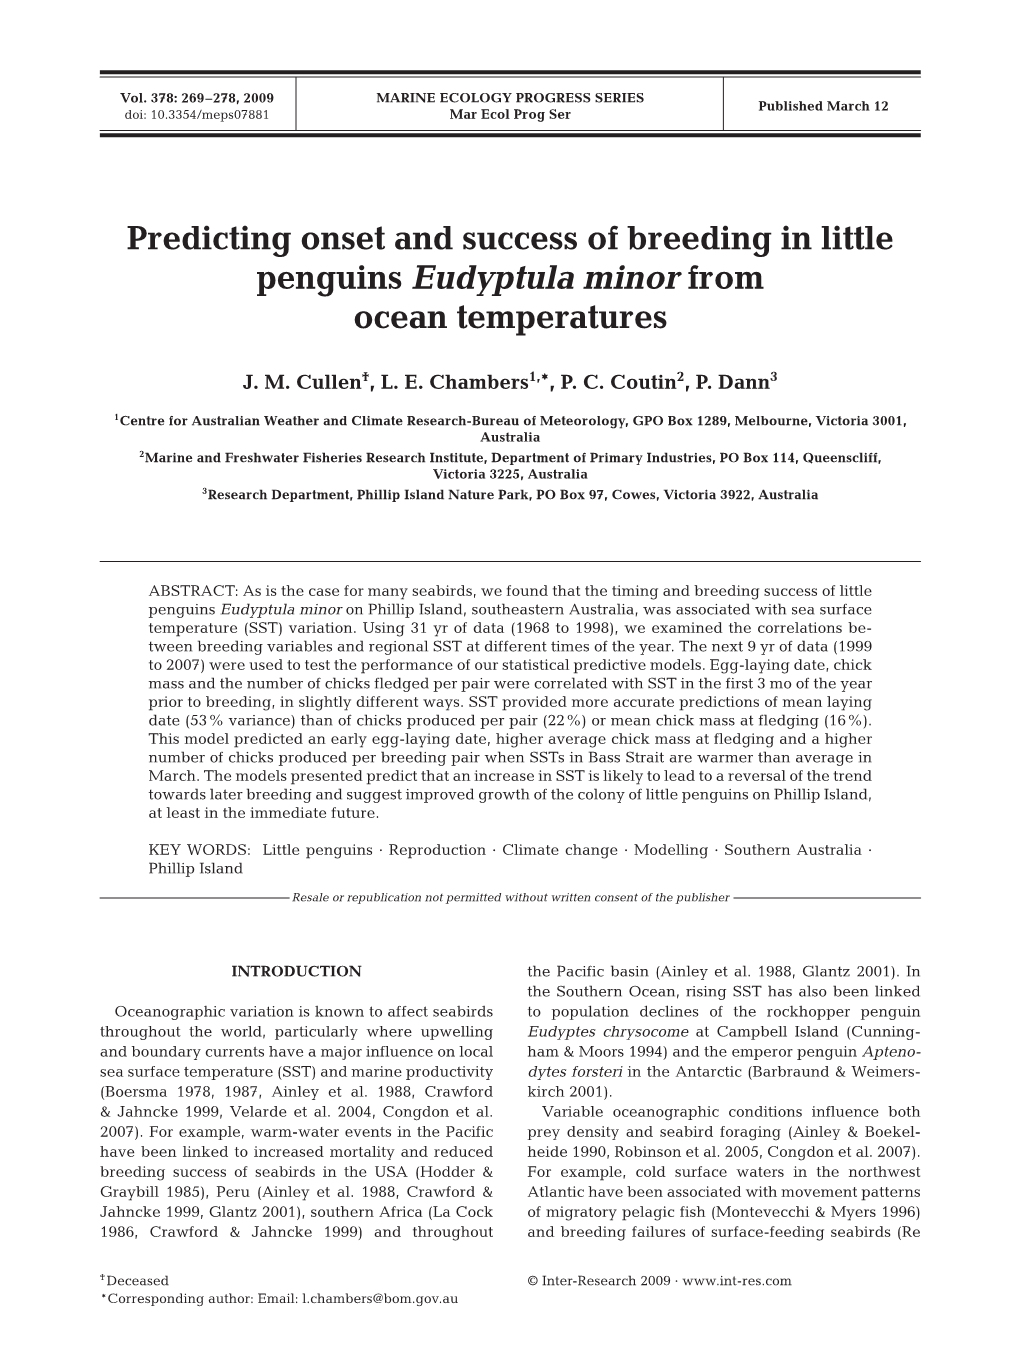 Predicting Onset and Success of Breeding in Little Penguins Eudyptula Minor from Ocean Temperatures